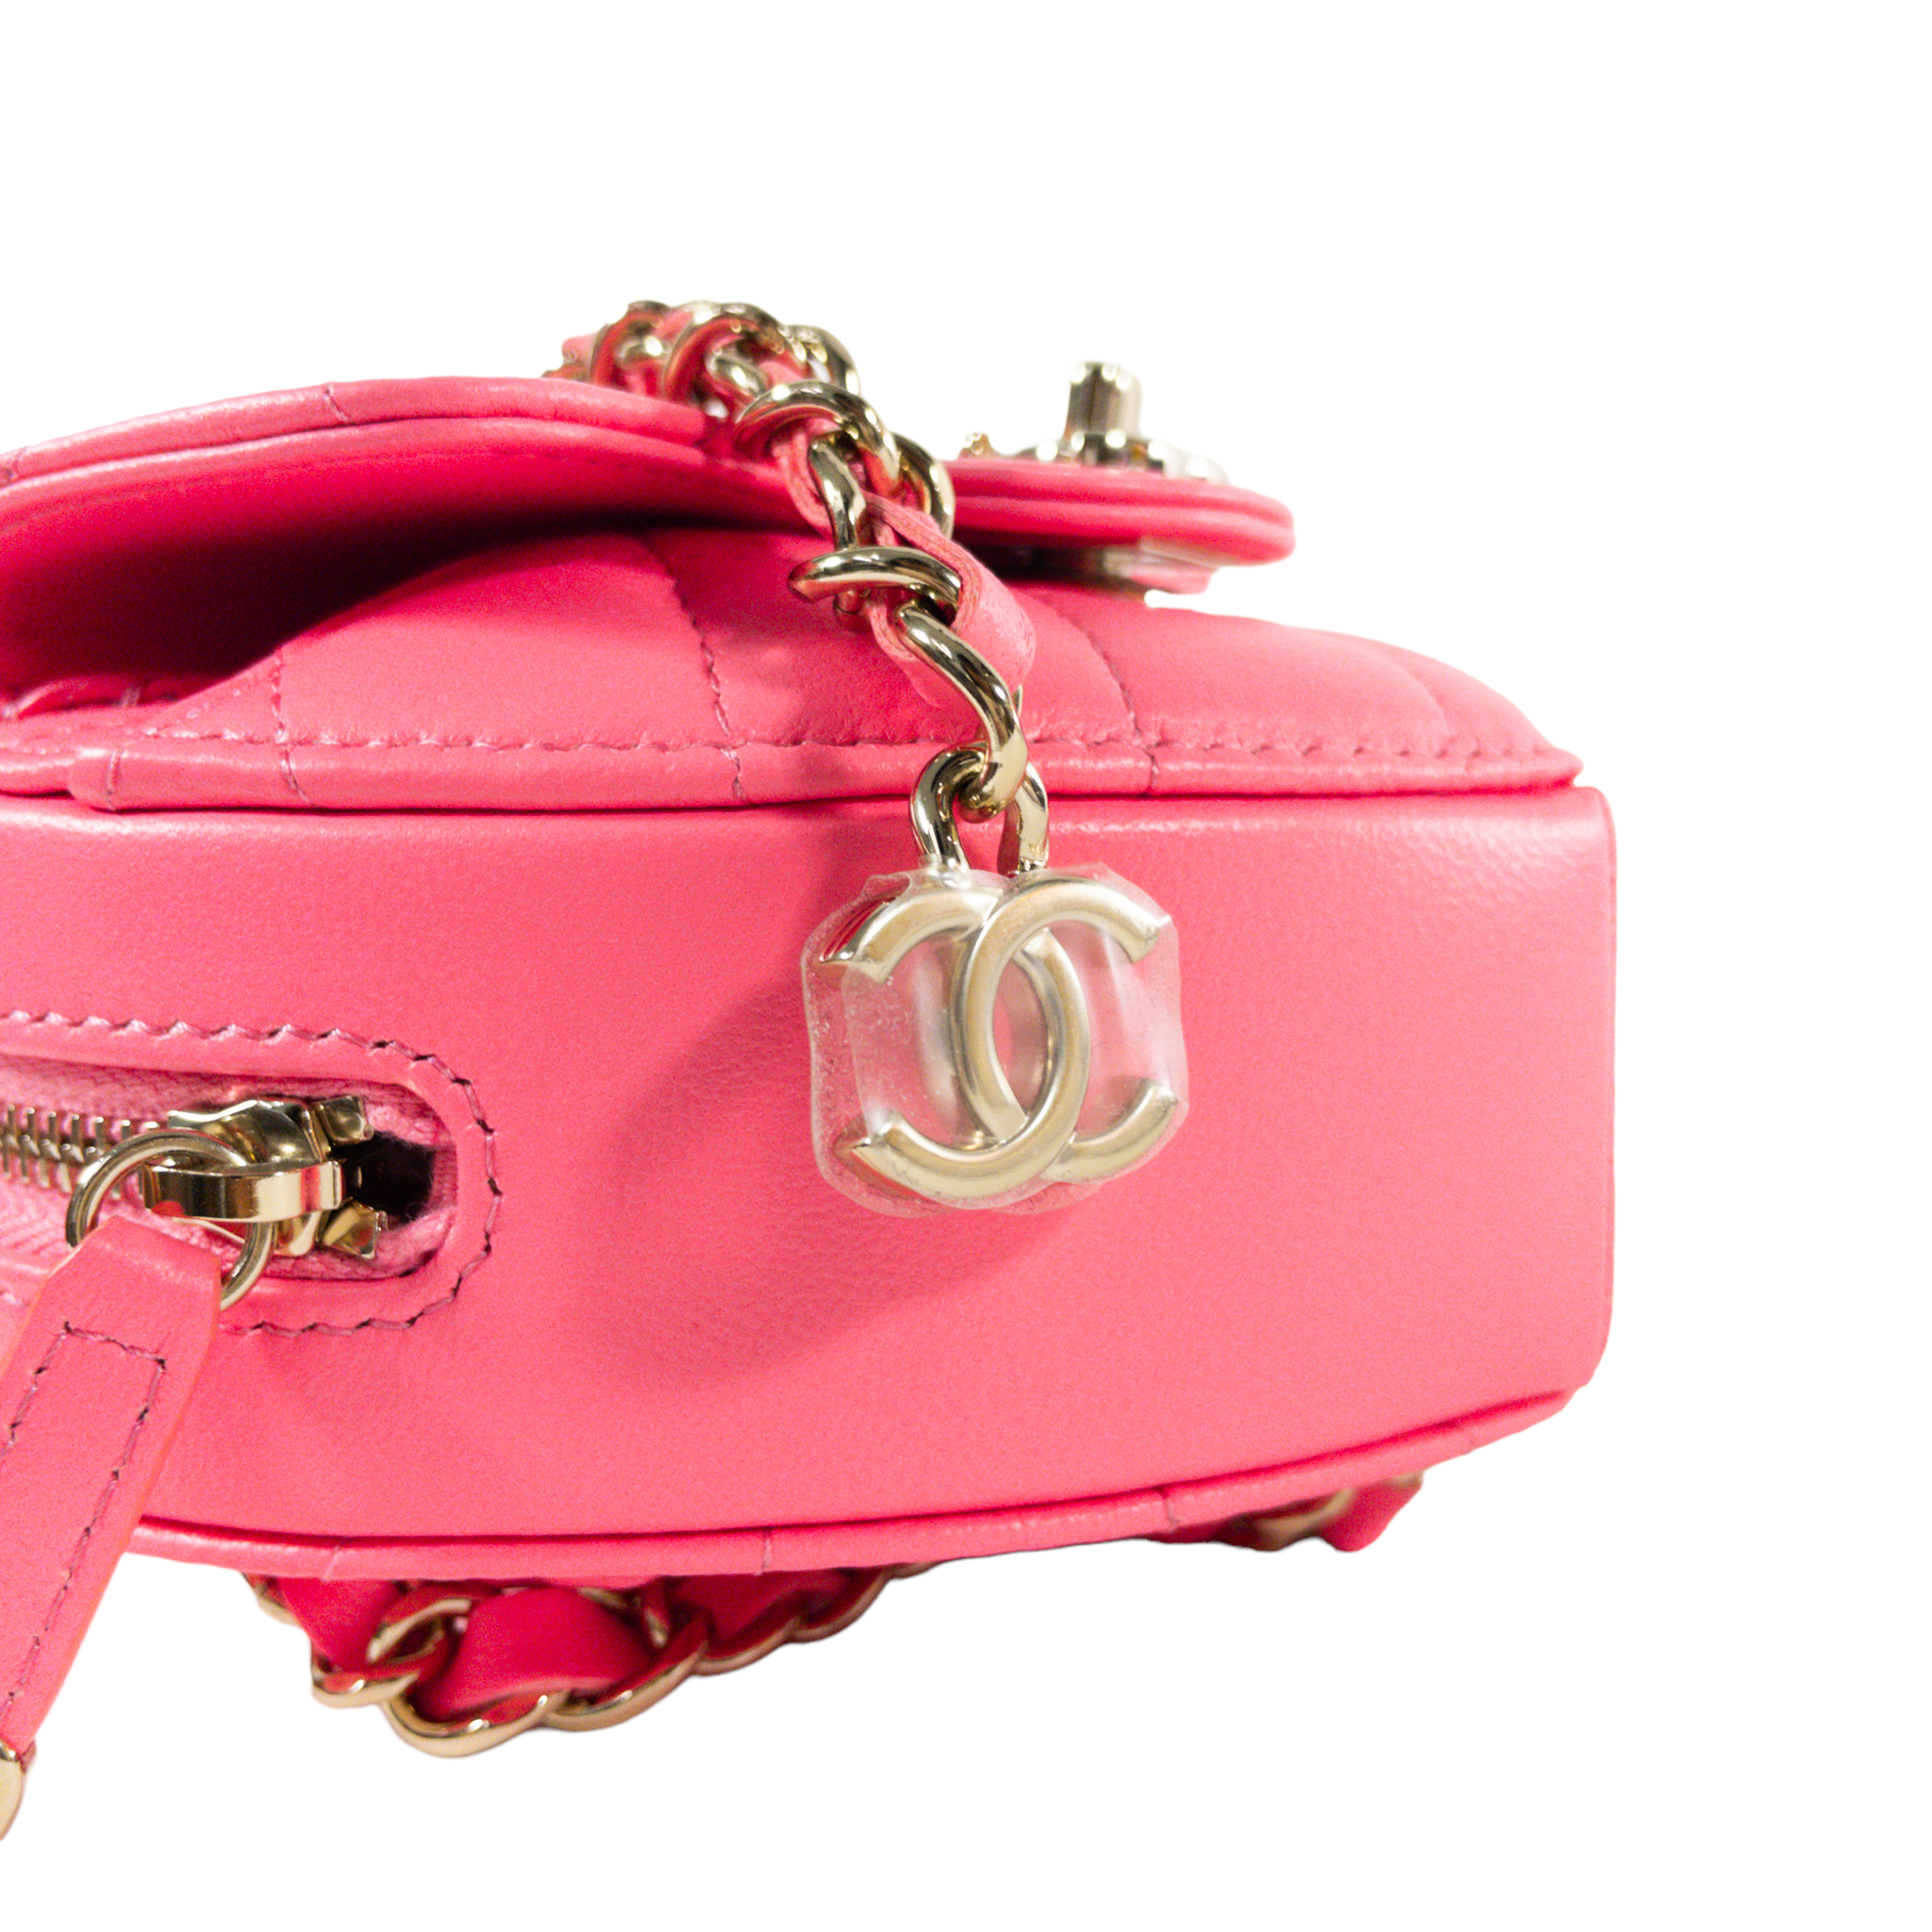 Chanel Pre-owned on Earth Round Bag - Pink